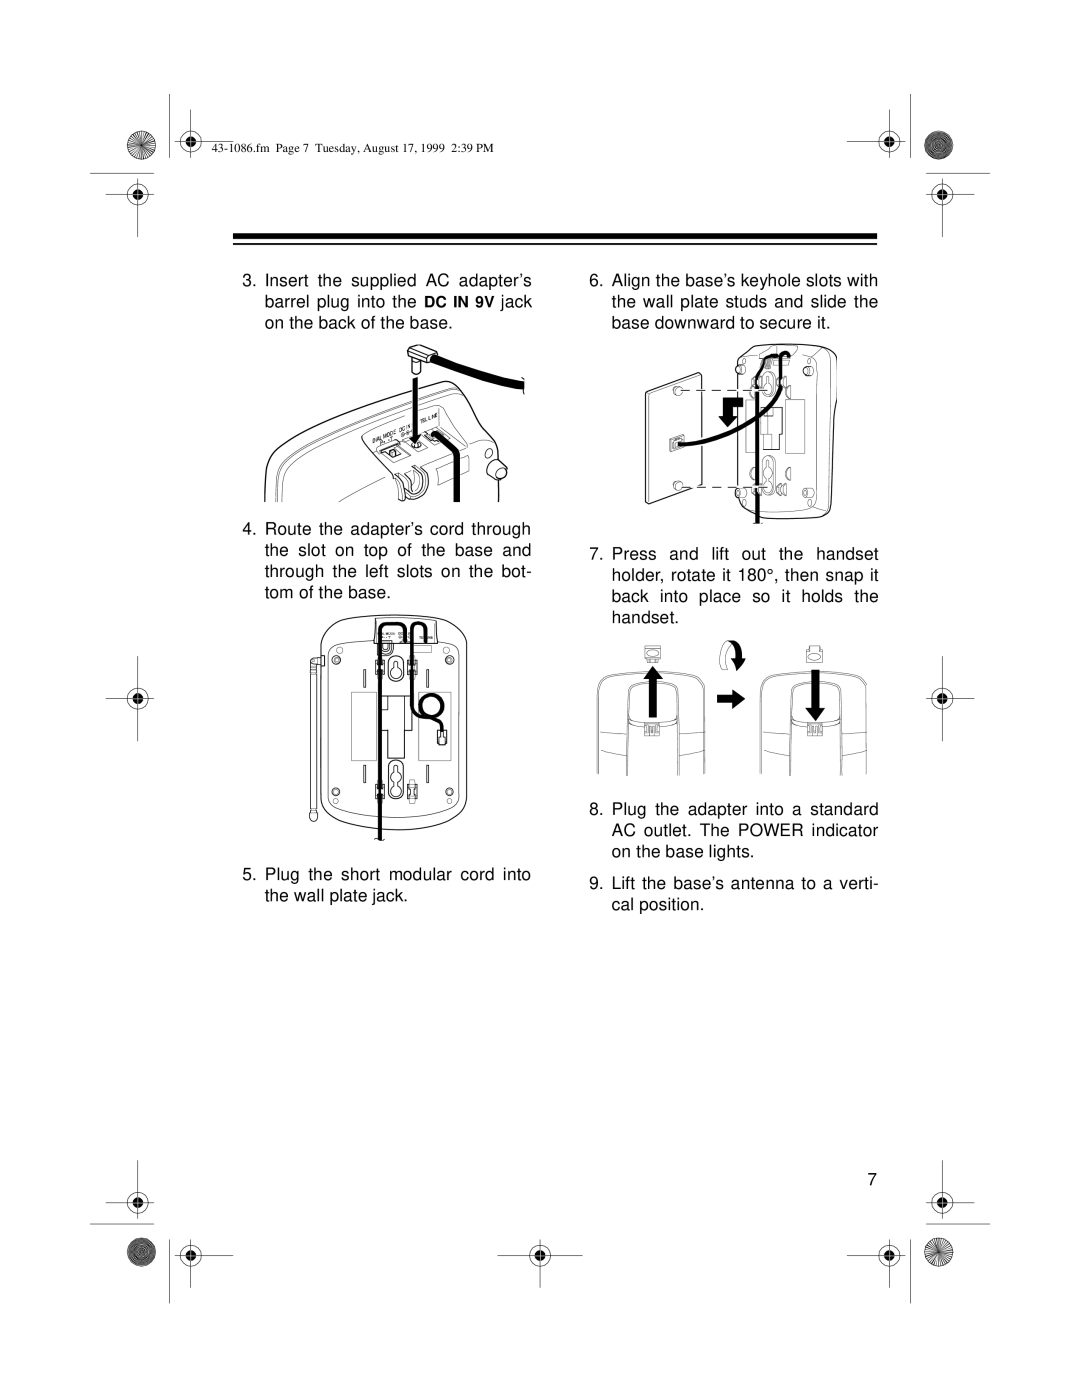 Radio Shack ET-916 owner manual fm Page 7 Tuesday, August 17, 1999 239 PM 